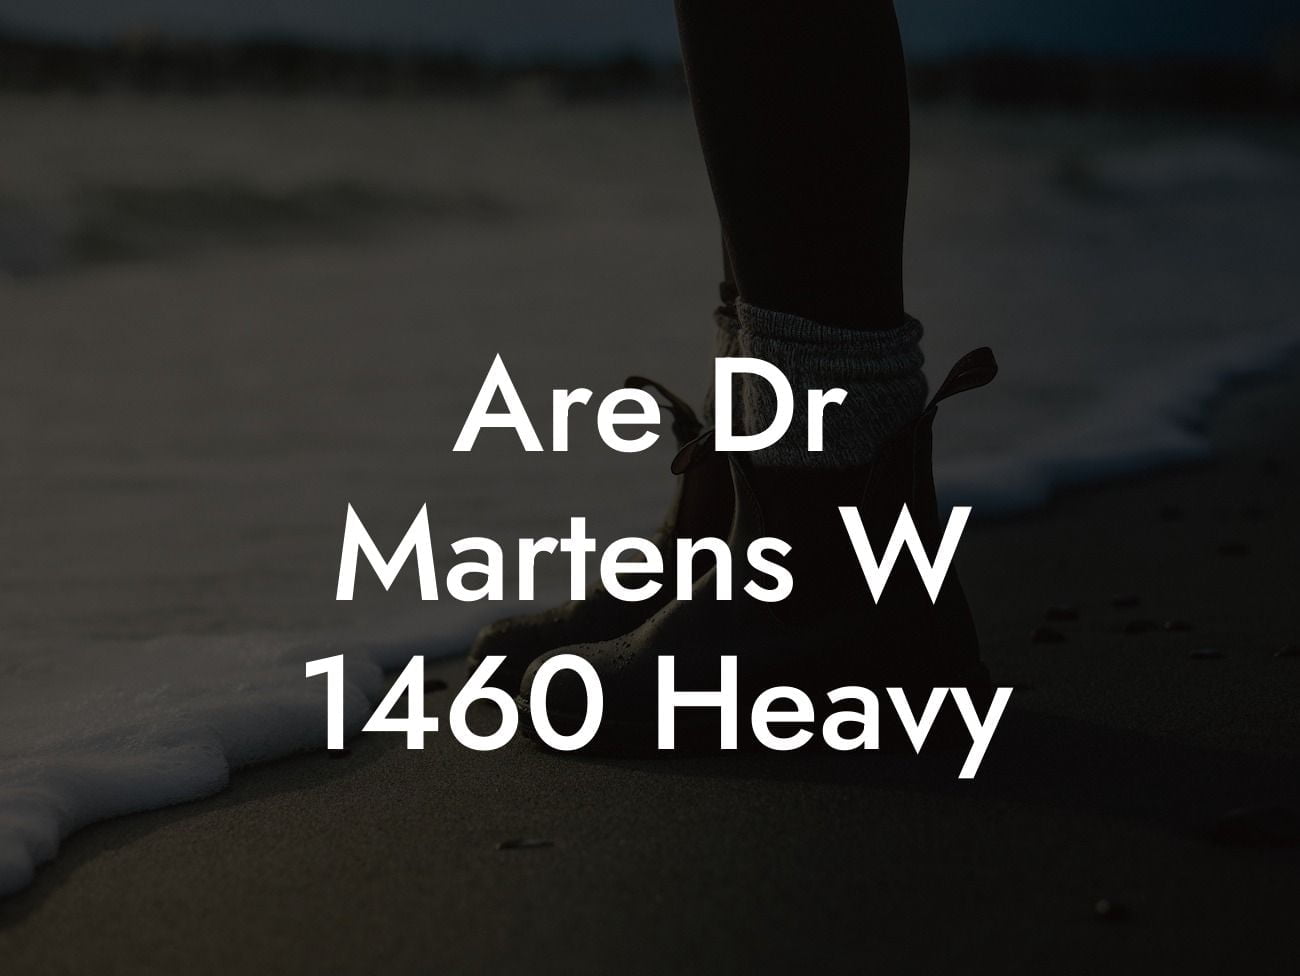 Are Dr Martens W 1460 Heavy